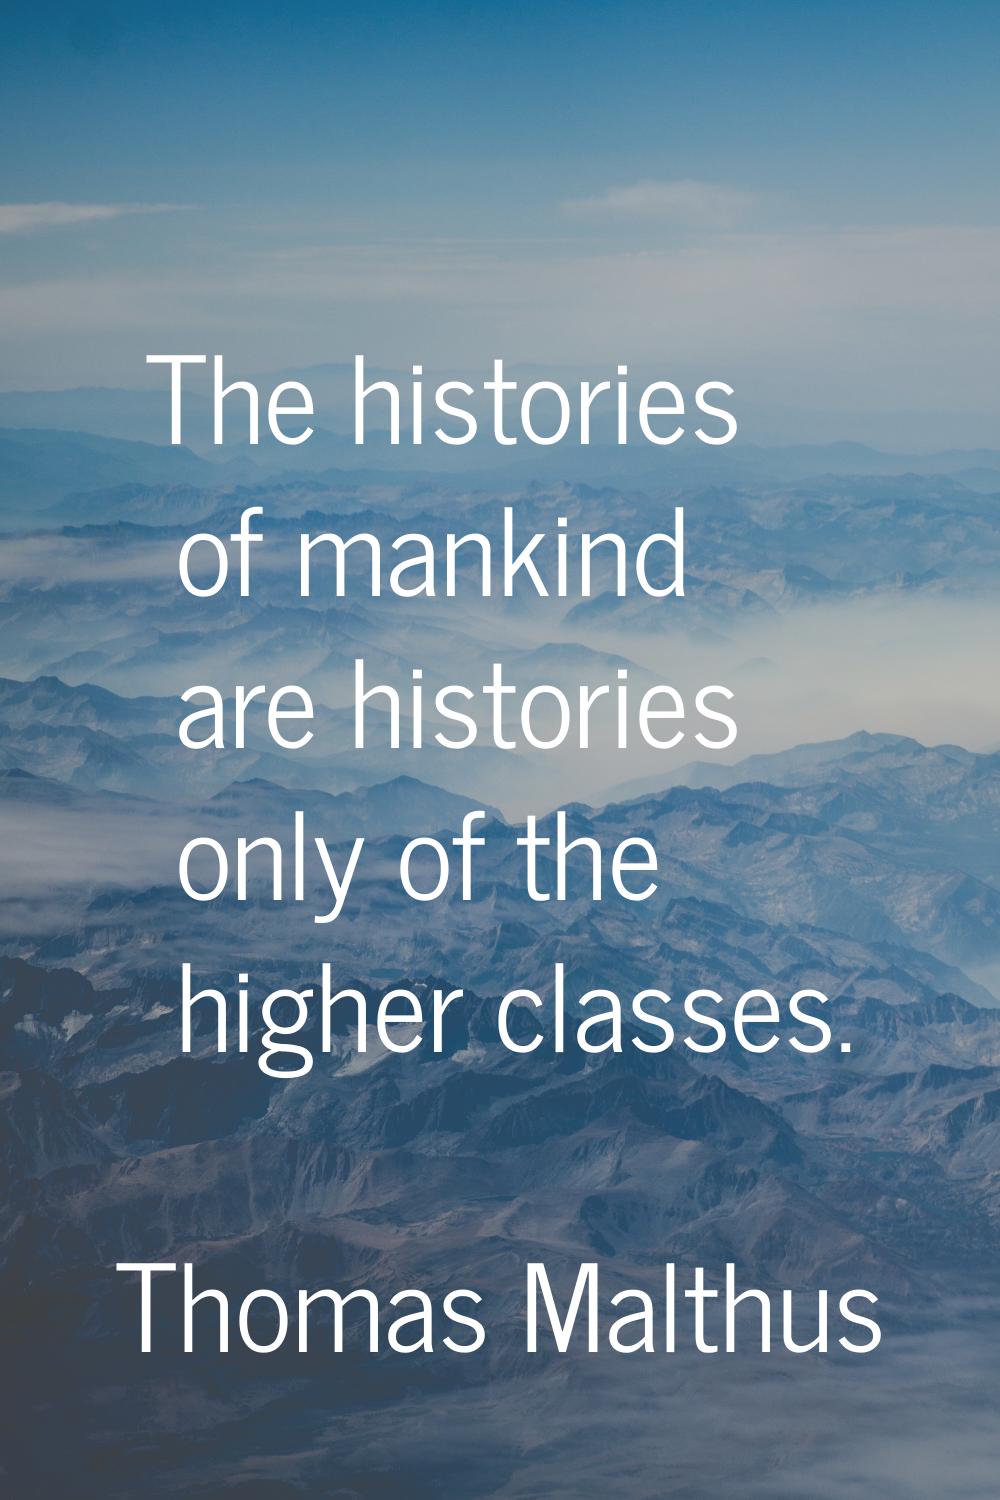 The histories of mankind are histories only of the higher classes.